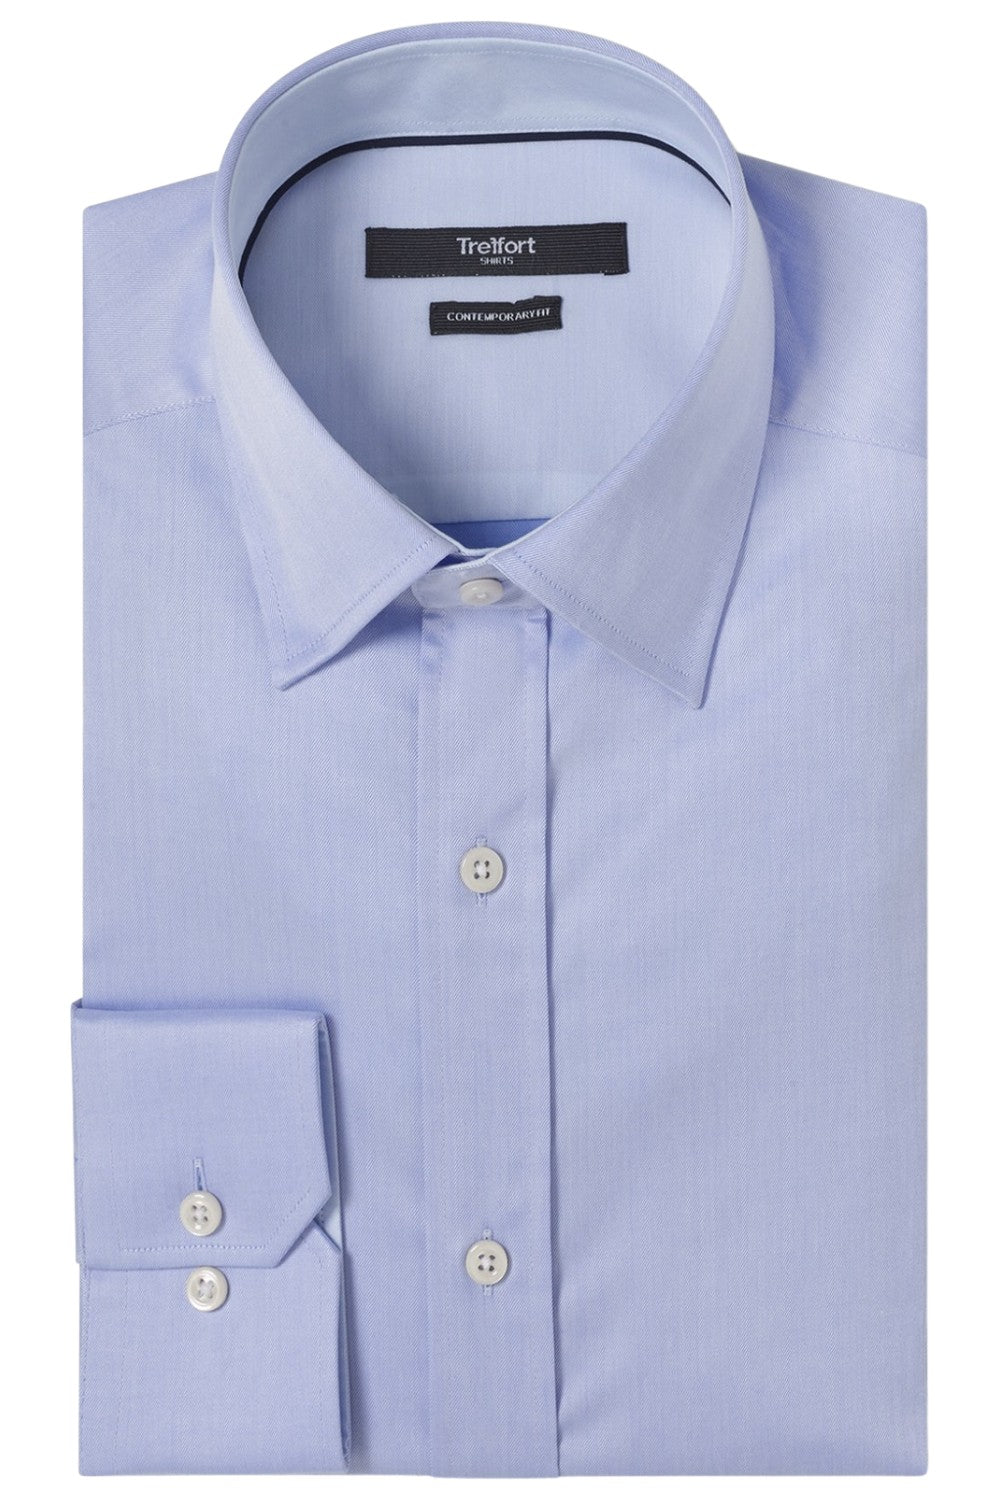 EVANS BLUE BUTTON DOWN DRESS SHIRT - CASUAL /FORMAL EVENT - FRONT VIEW